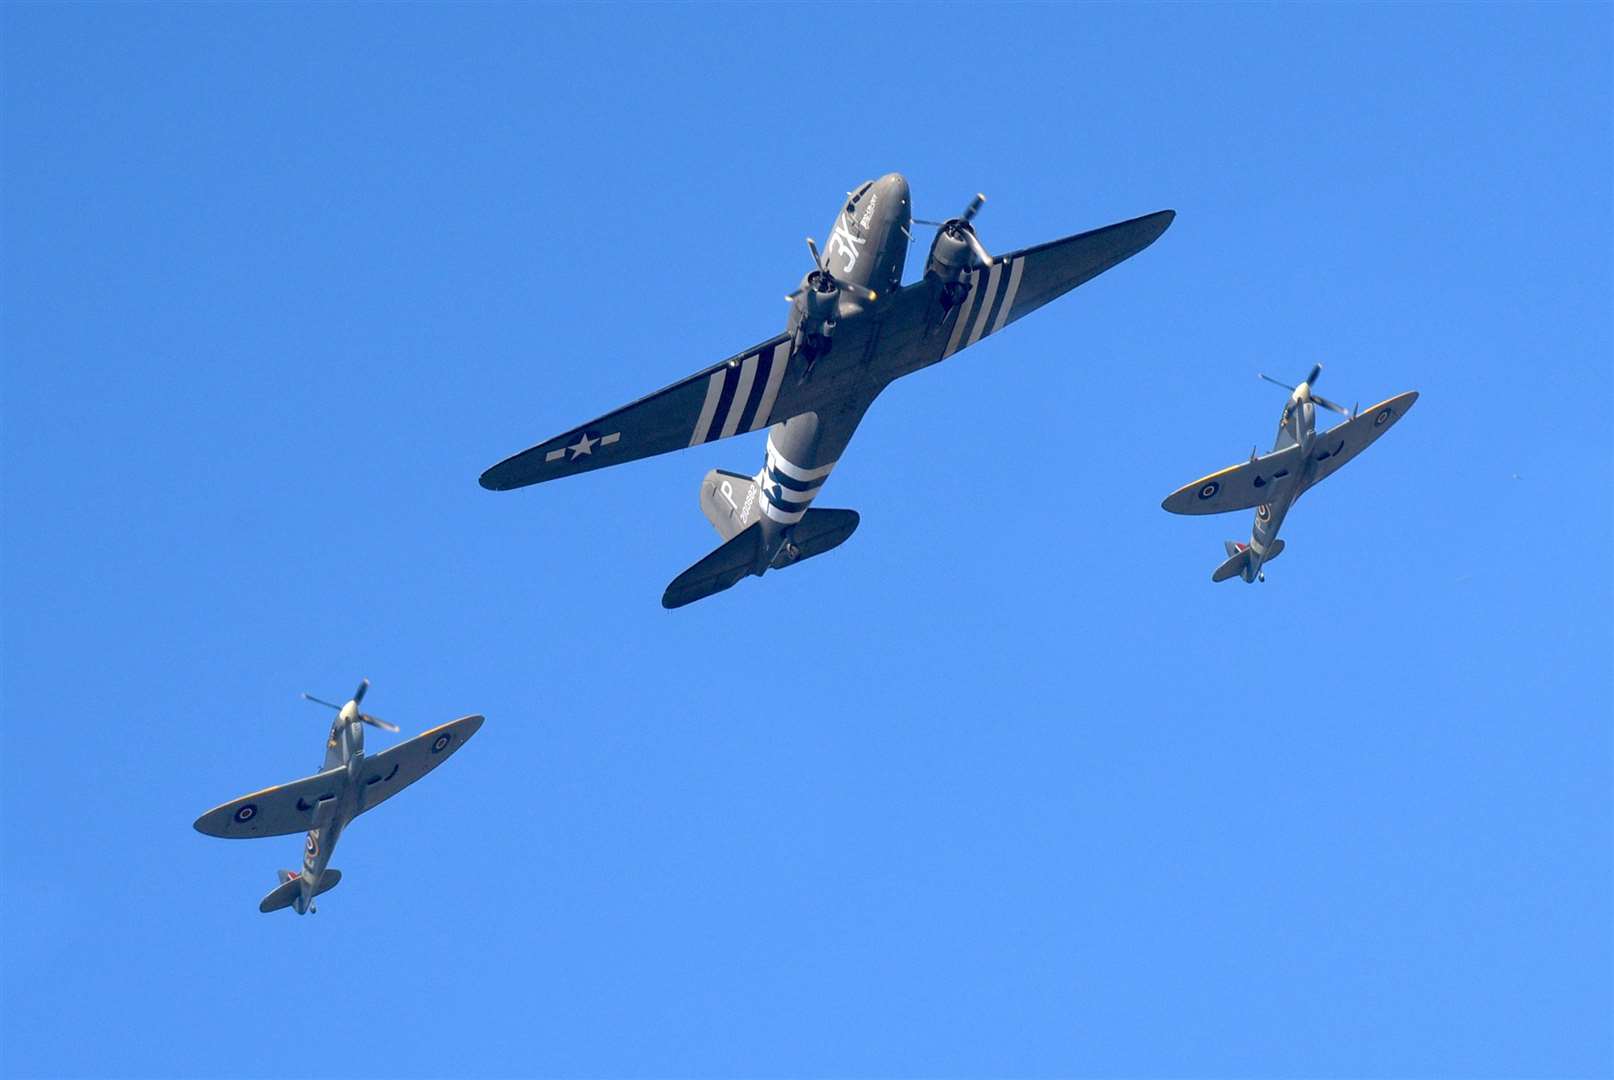 Aero Legend Spitfires and a C. 47 Dakota flew over Gravesend as part of the Remembrance Day commemorations. Photo: Fraser Gray. (21360650)